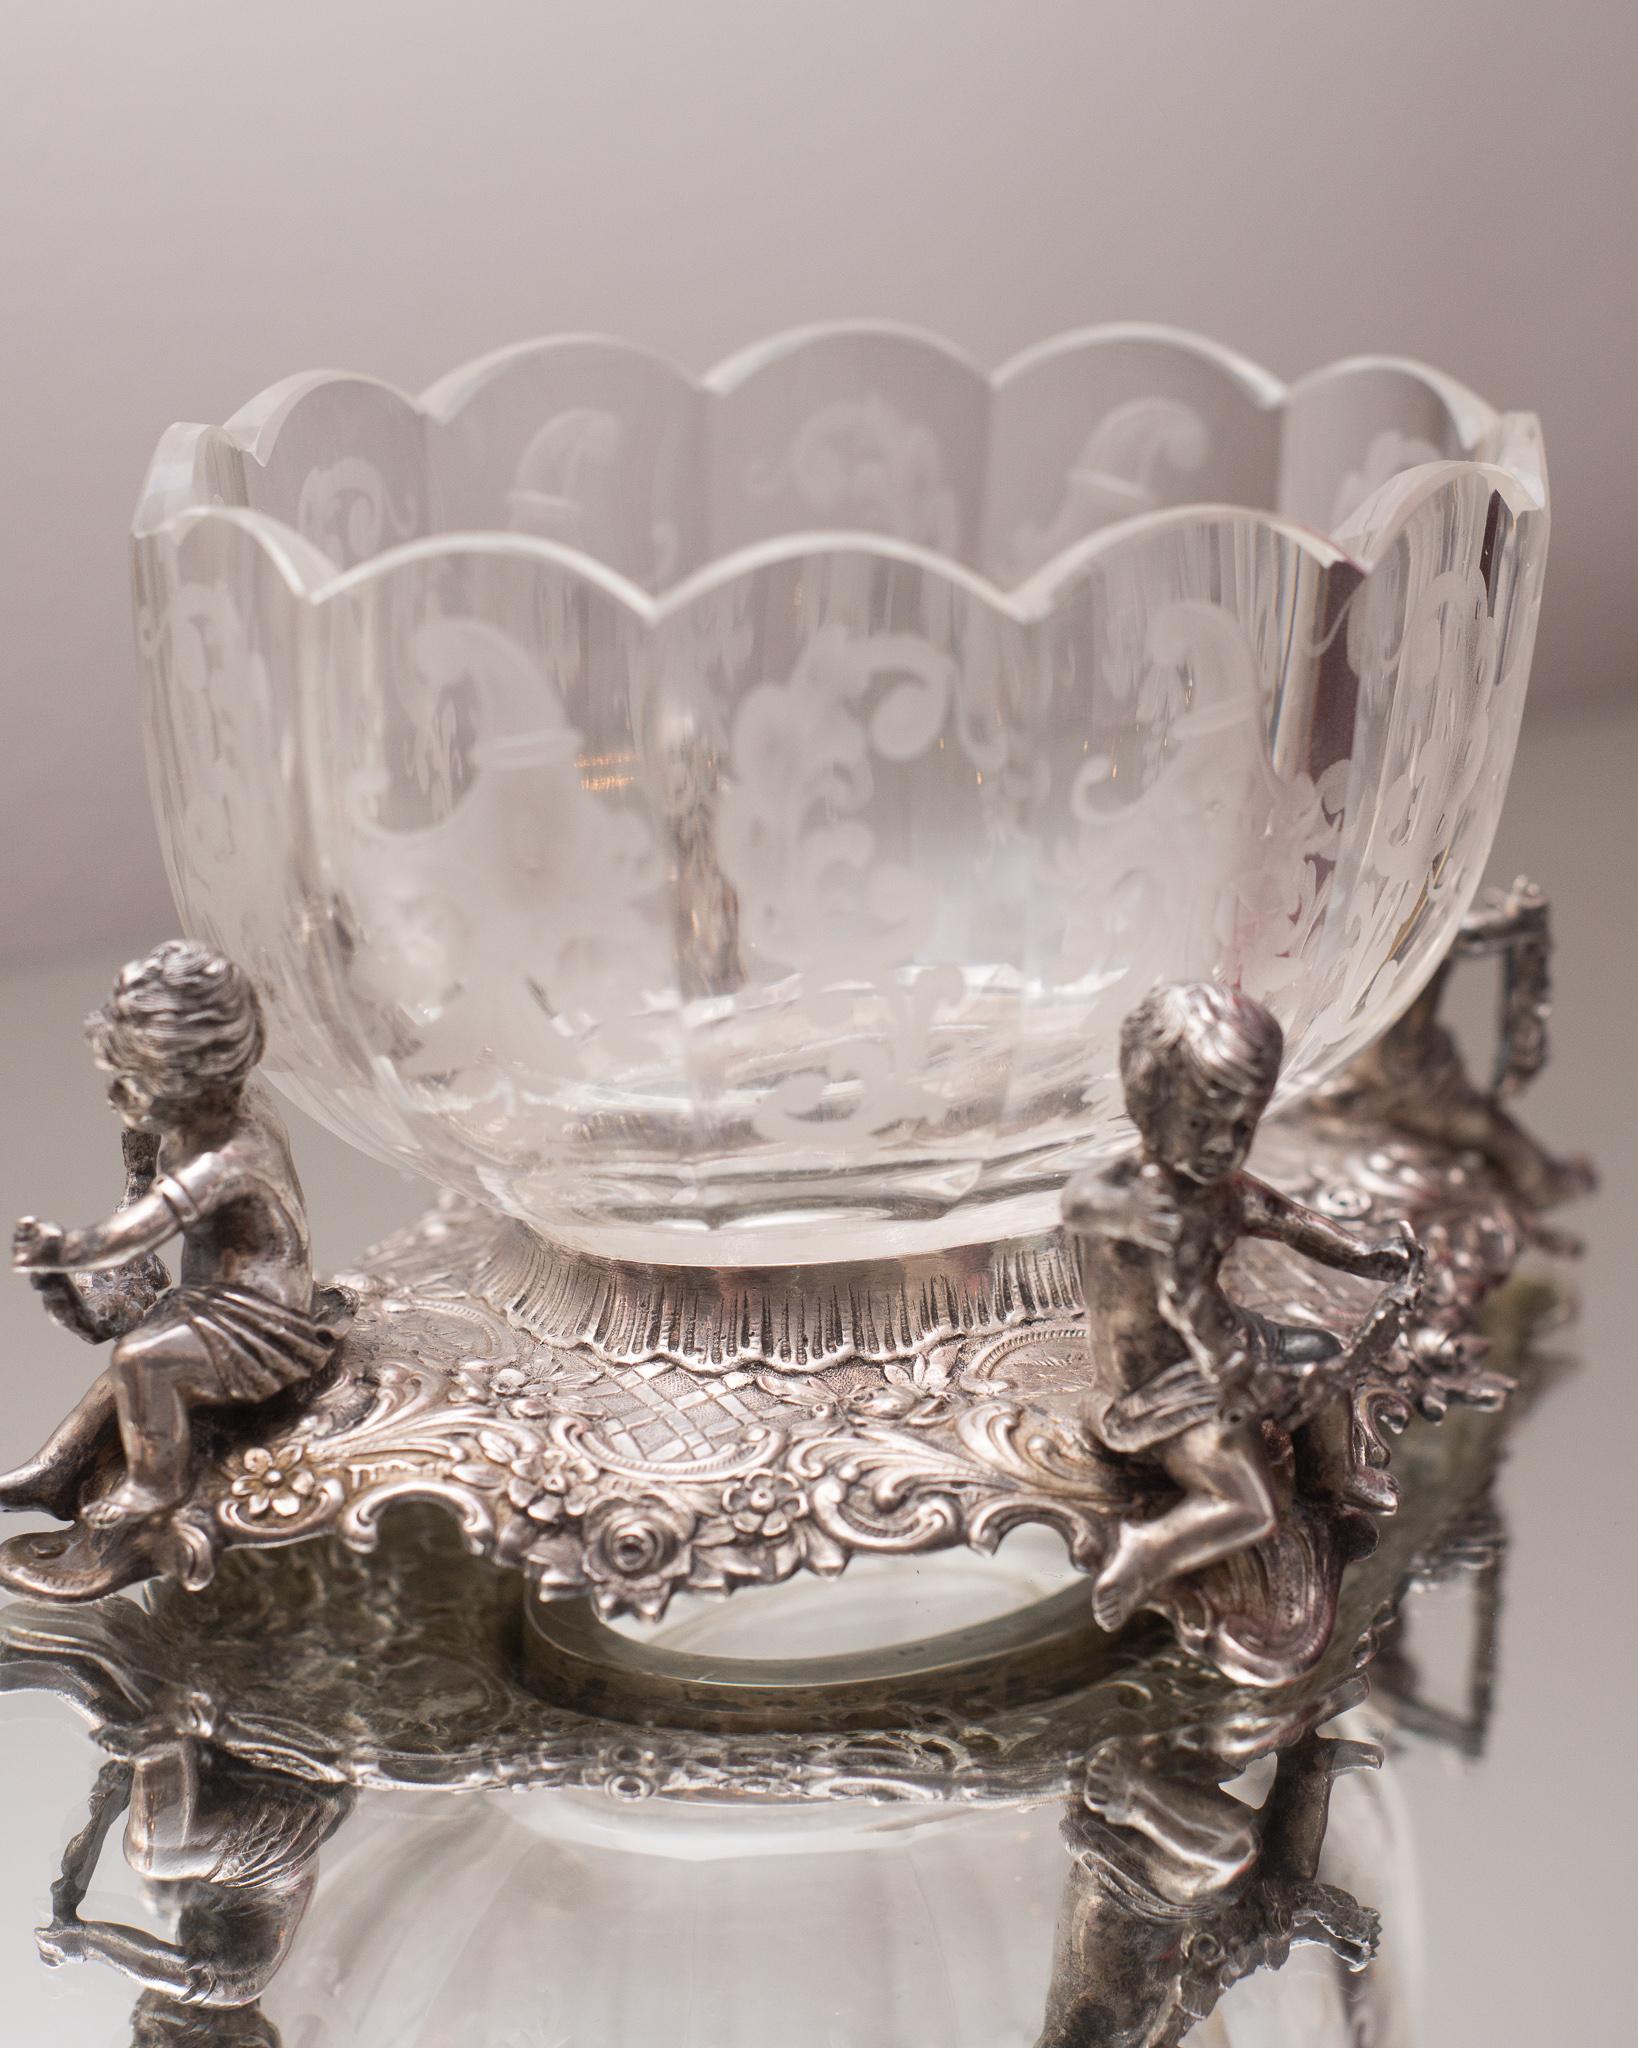 This ethereal antique German etched glass bowl on a 800 German silver base decorated with cherubs is a precious addition to any table. This jewel belongs in a powder room, master bedroom or on any coffee table.